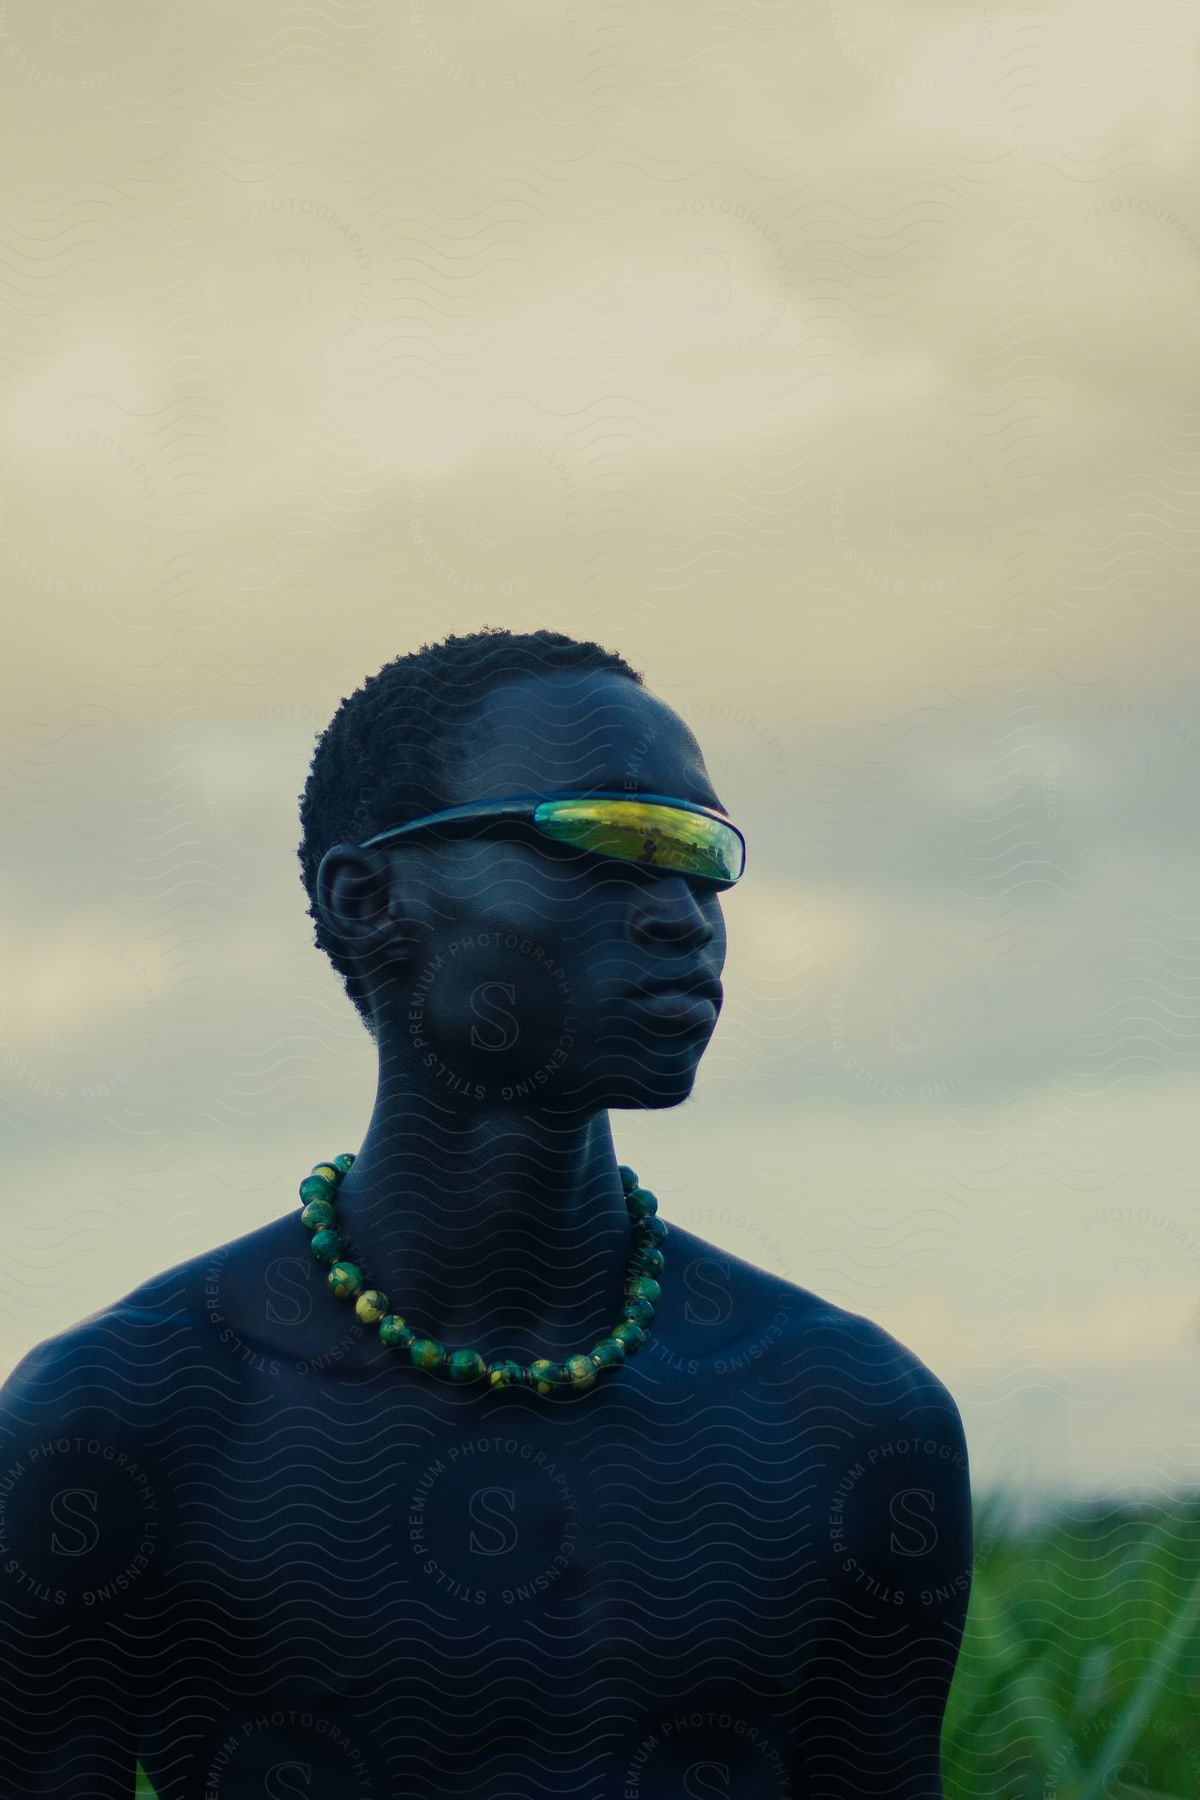 a man standing in a field wearing Rave Glasses and a yellow beads necklace.